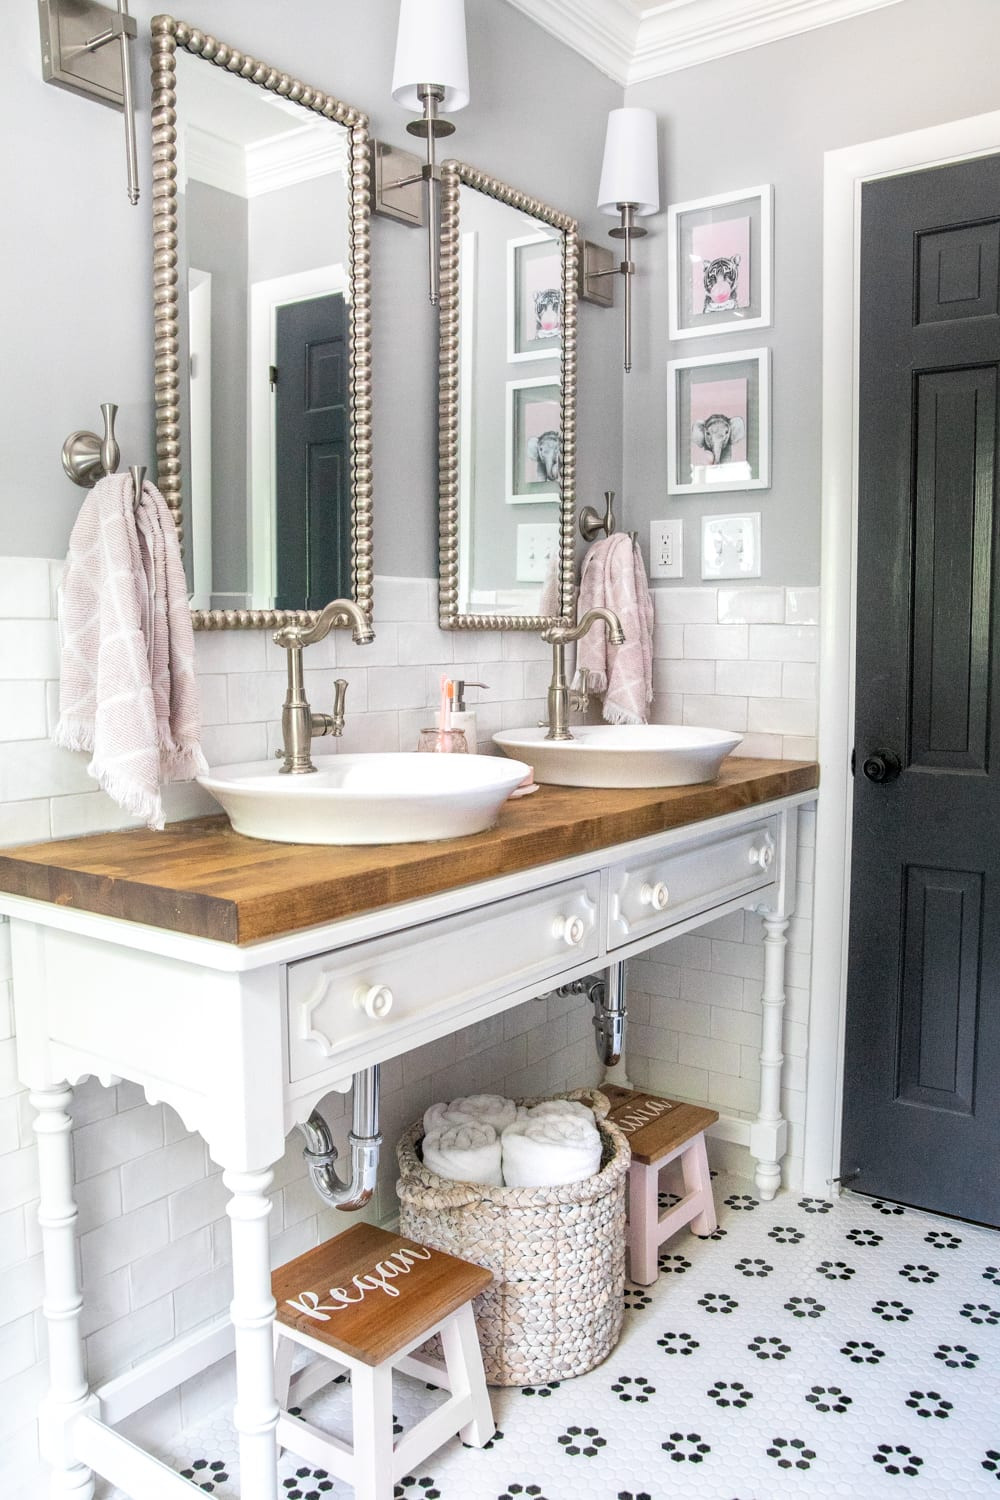 Girls Bathroom Decor
 Girls Bathroom Decor Details and Sources Bless er House